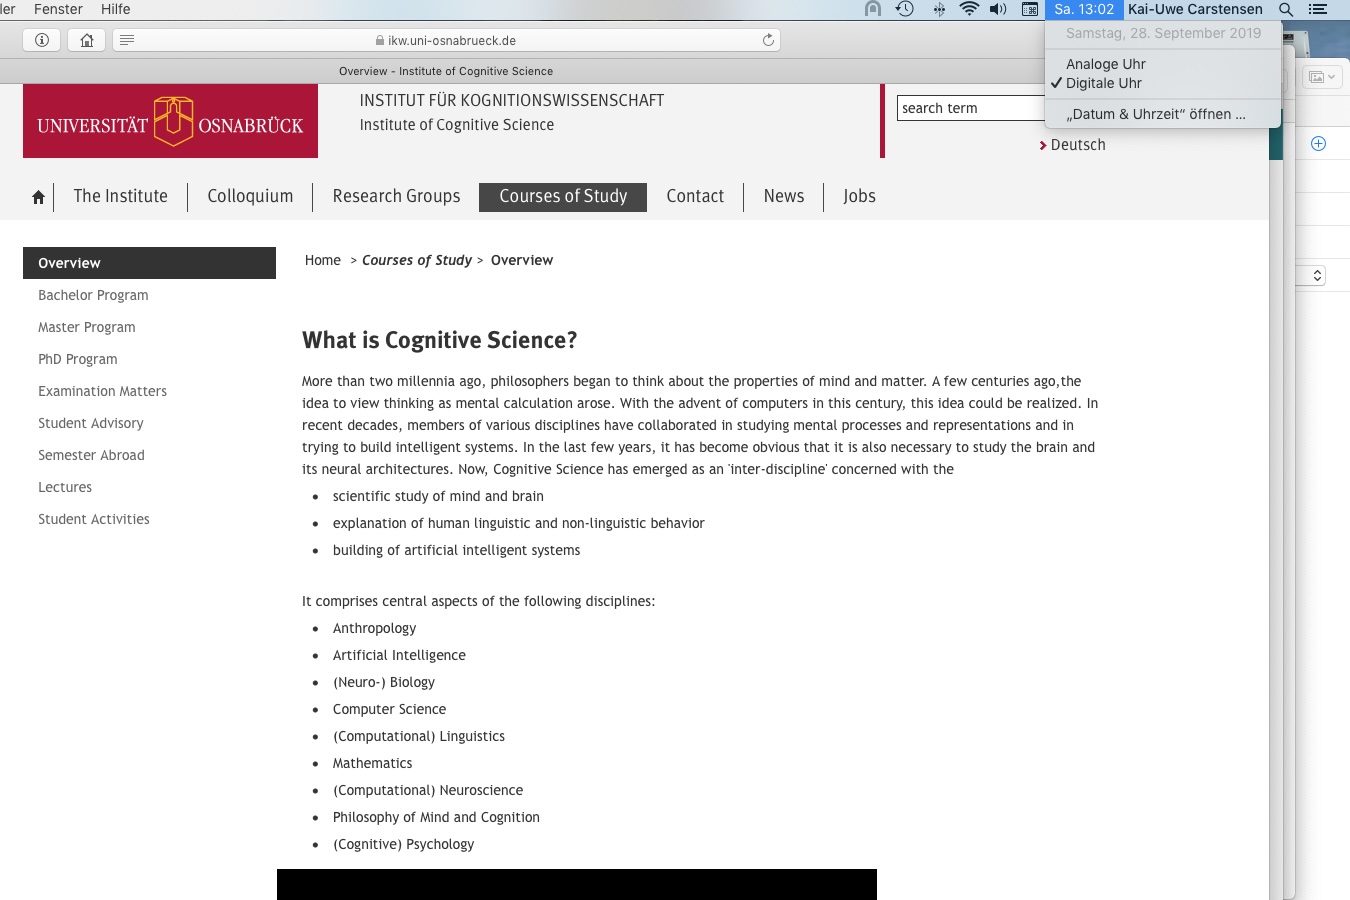 Cognitive Science ad